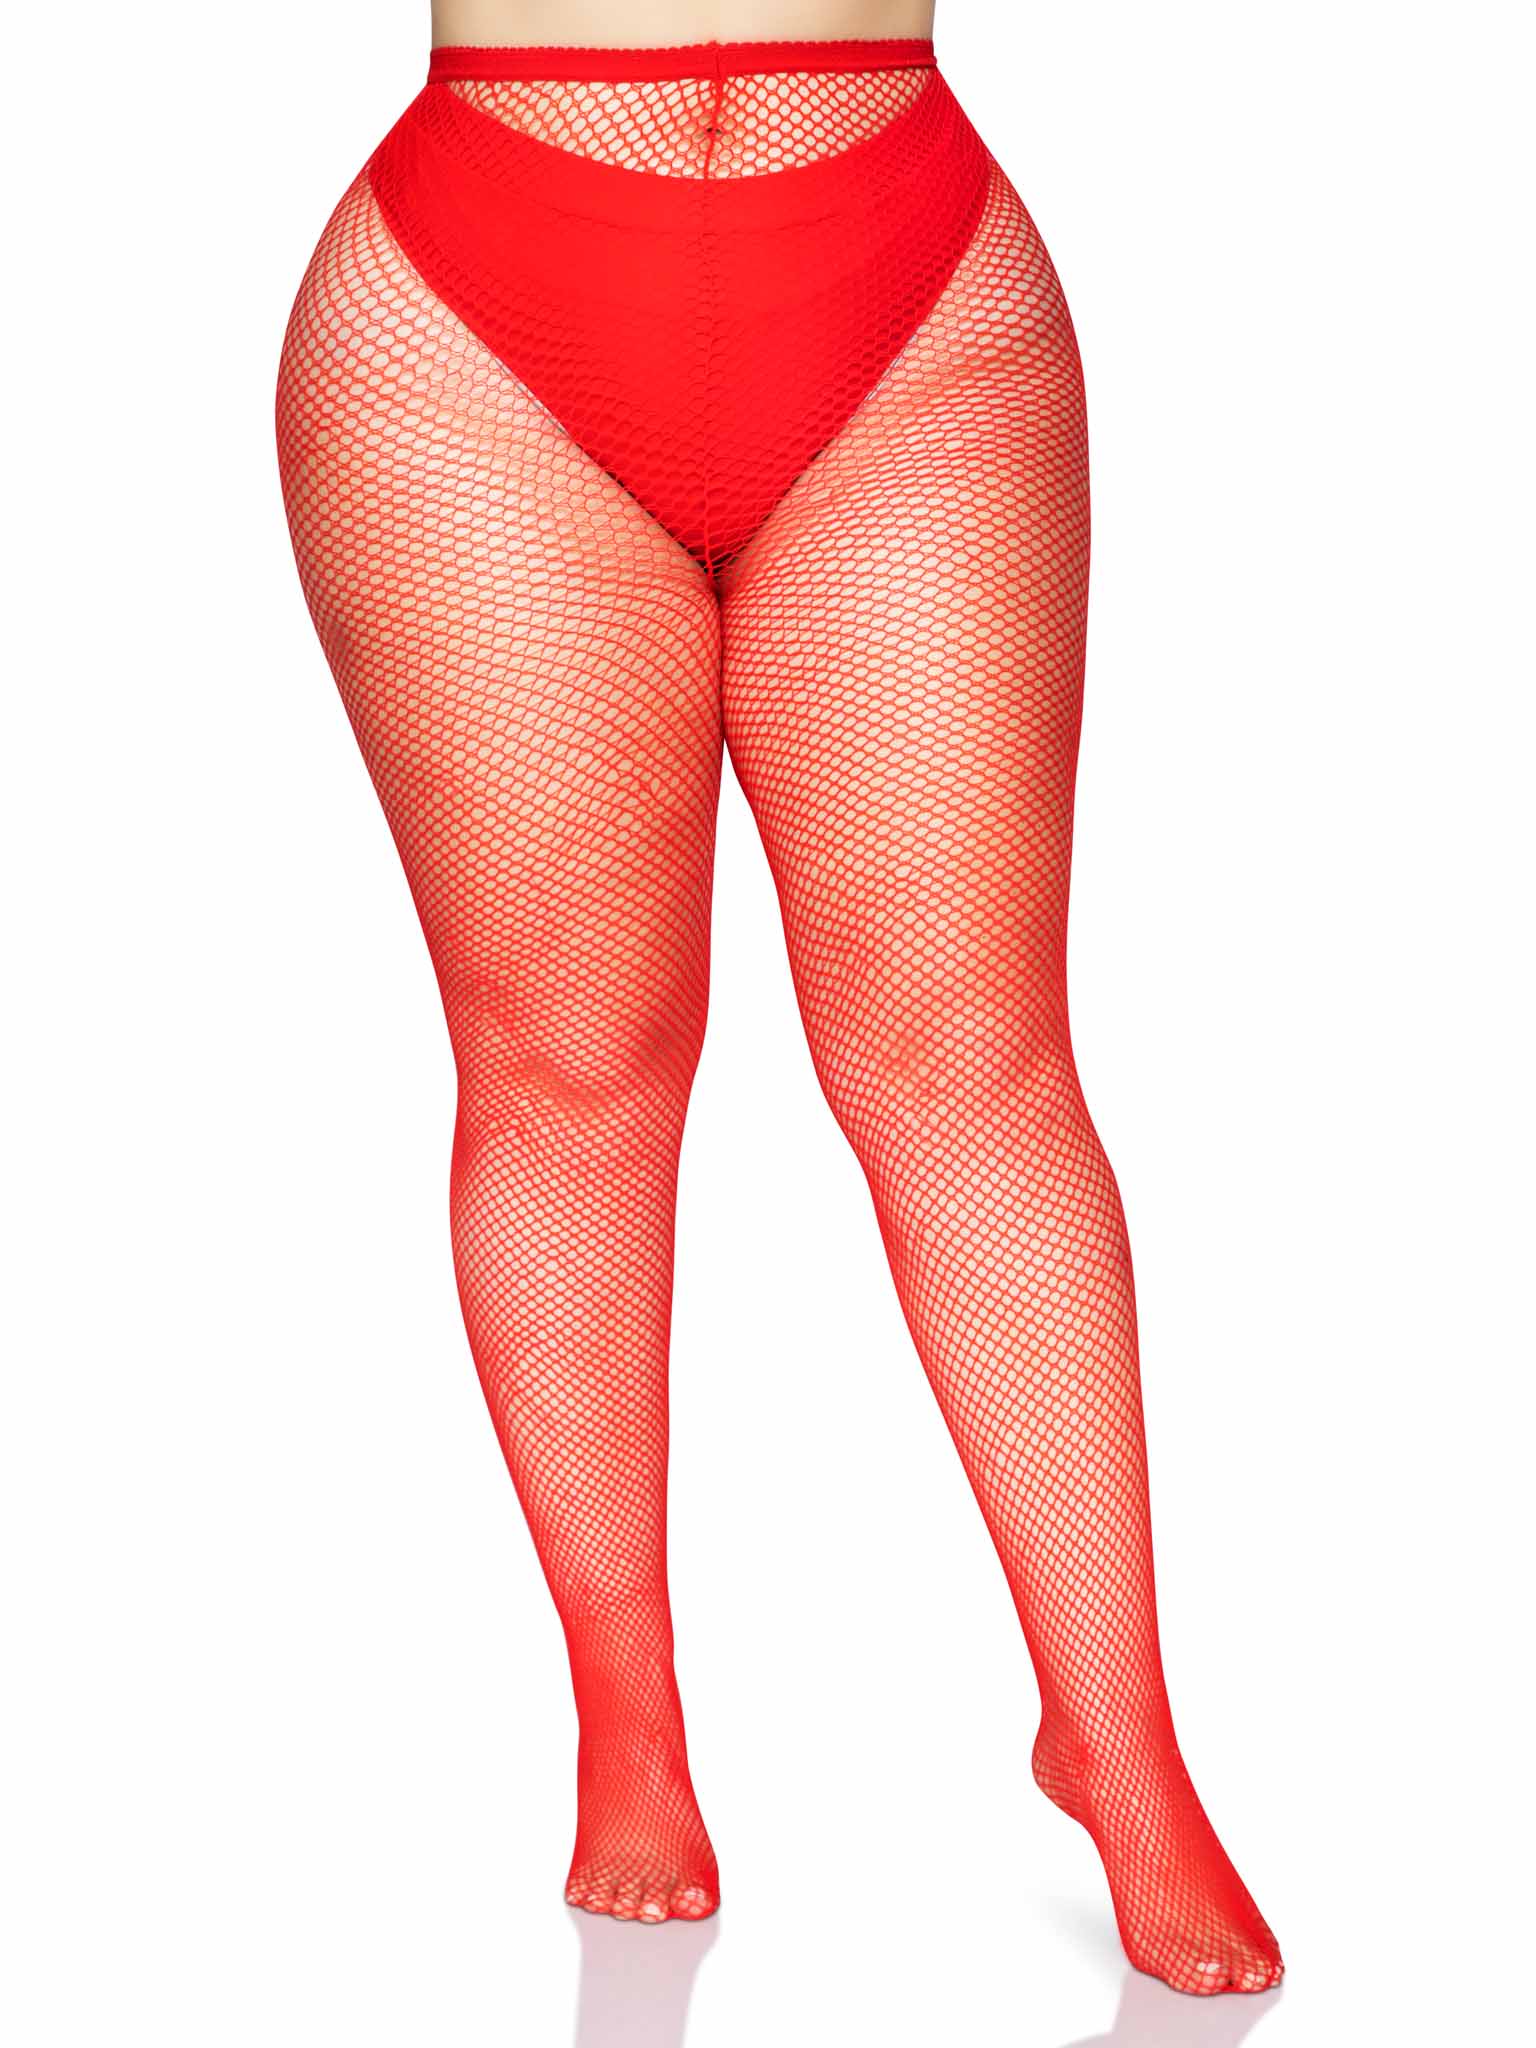 Risa Plus Nylon Fishnet Tights- Red – Adult Source